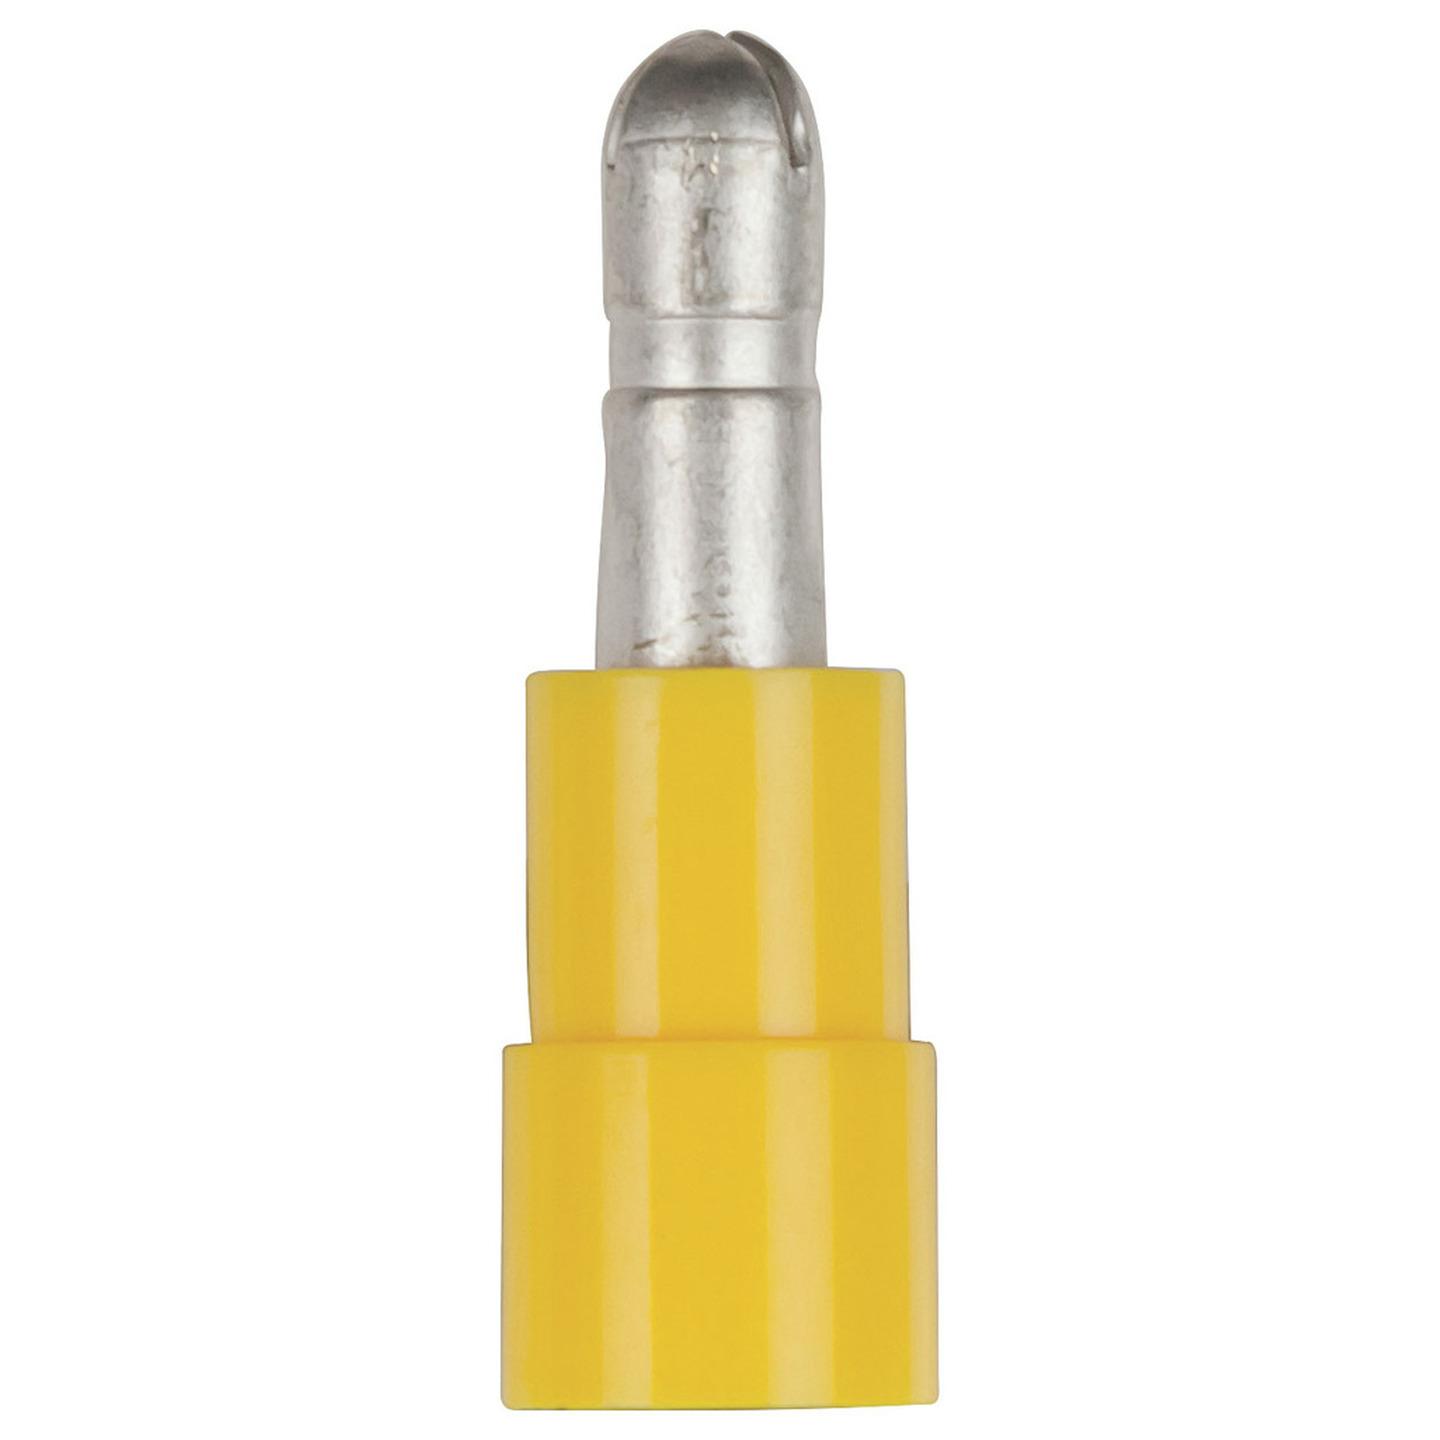 4mm Bullet Male - Yellow - Pack of 8